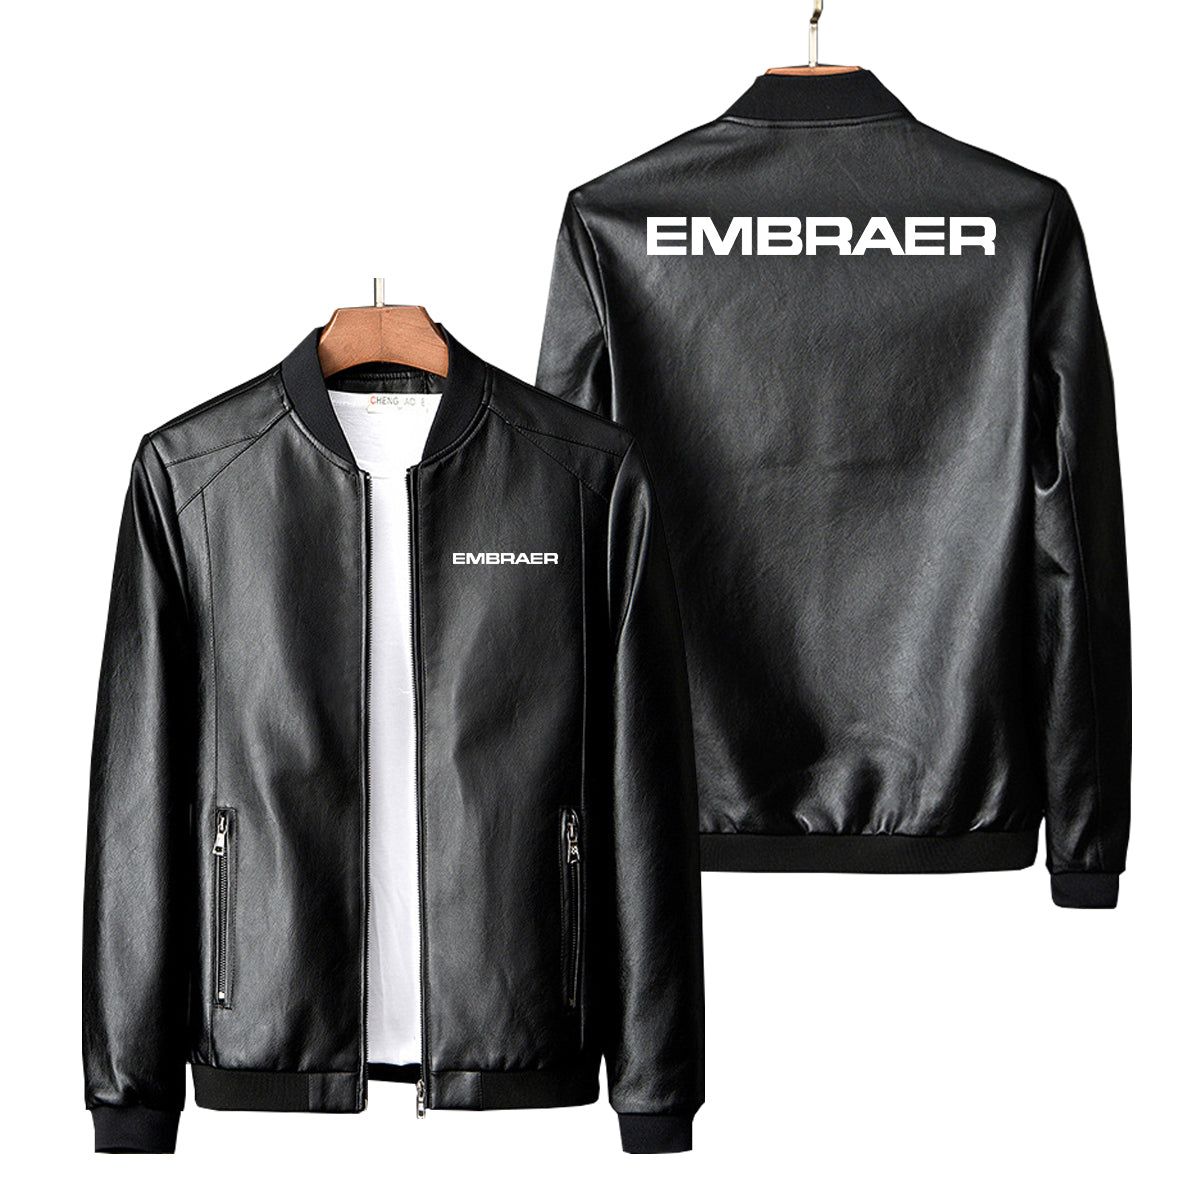 Embraer & Text Designed PU Leather Jackets